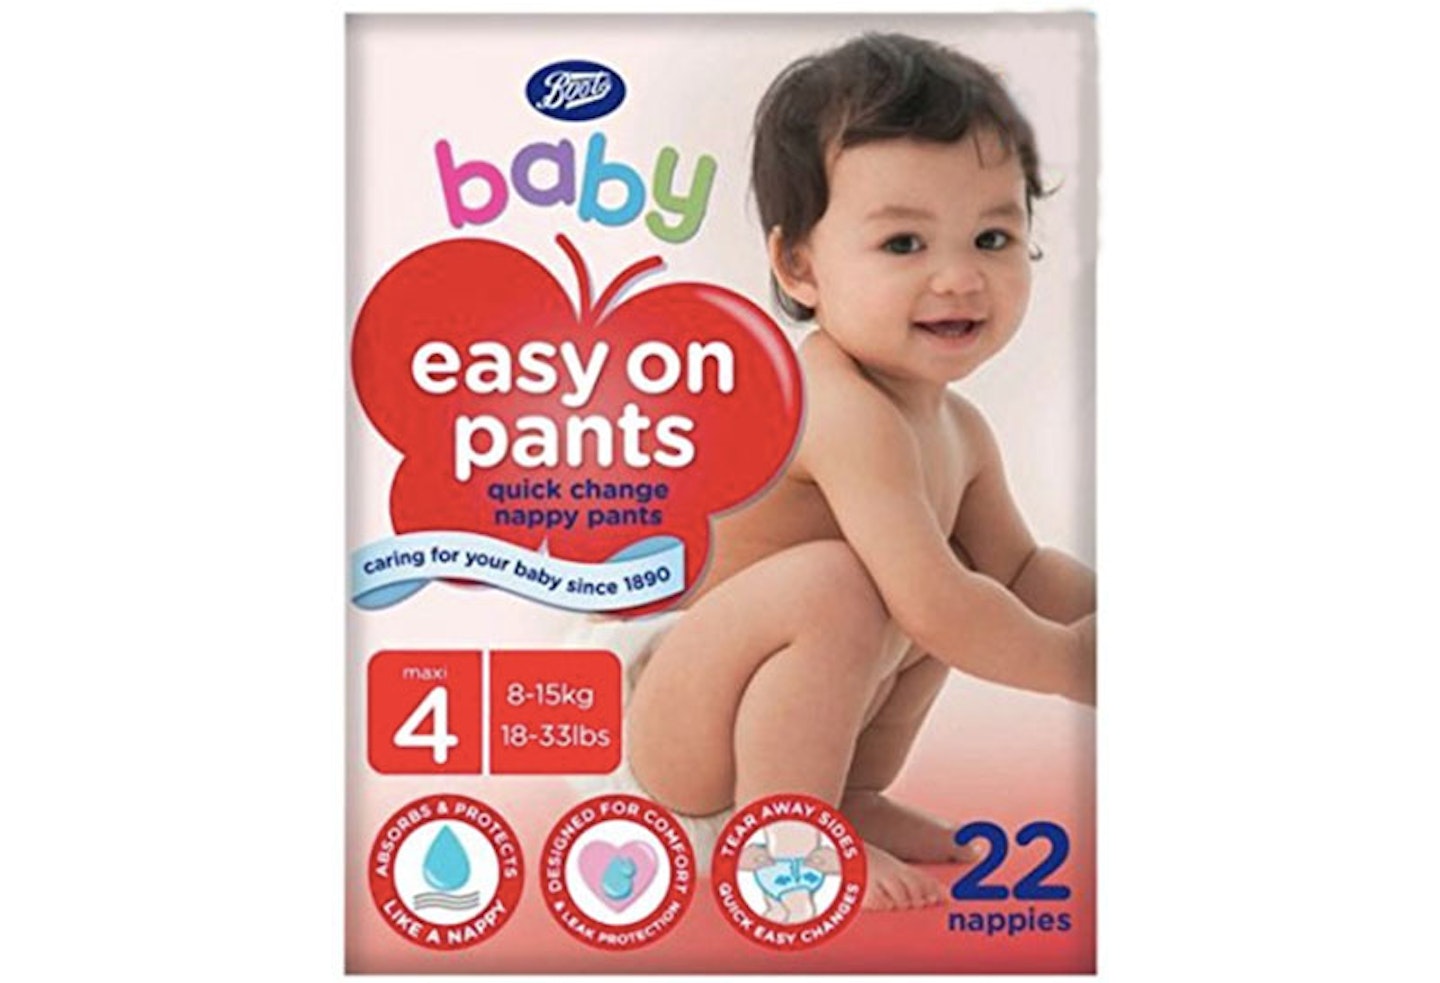 Boots Baby Easy On Pants review